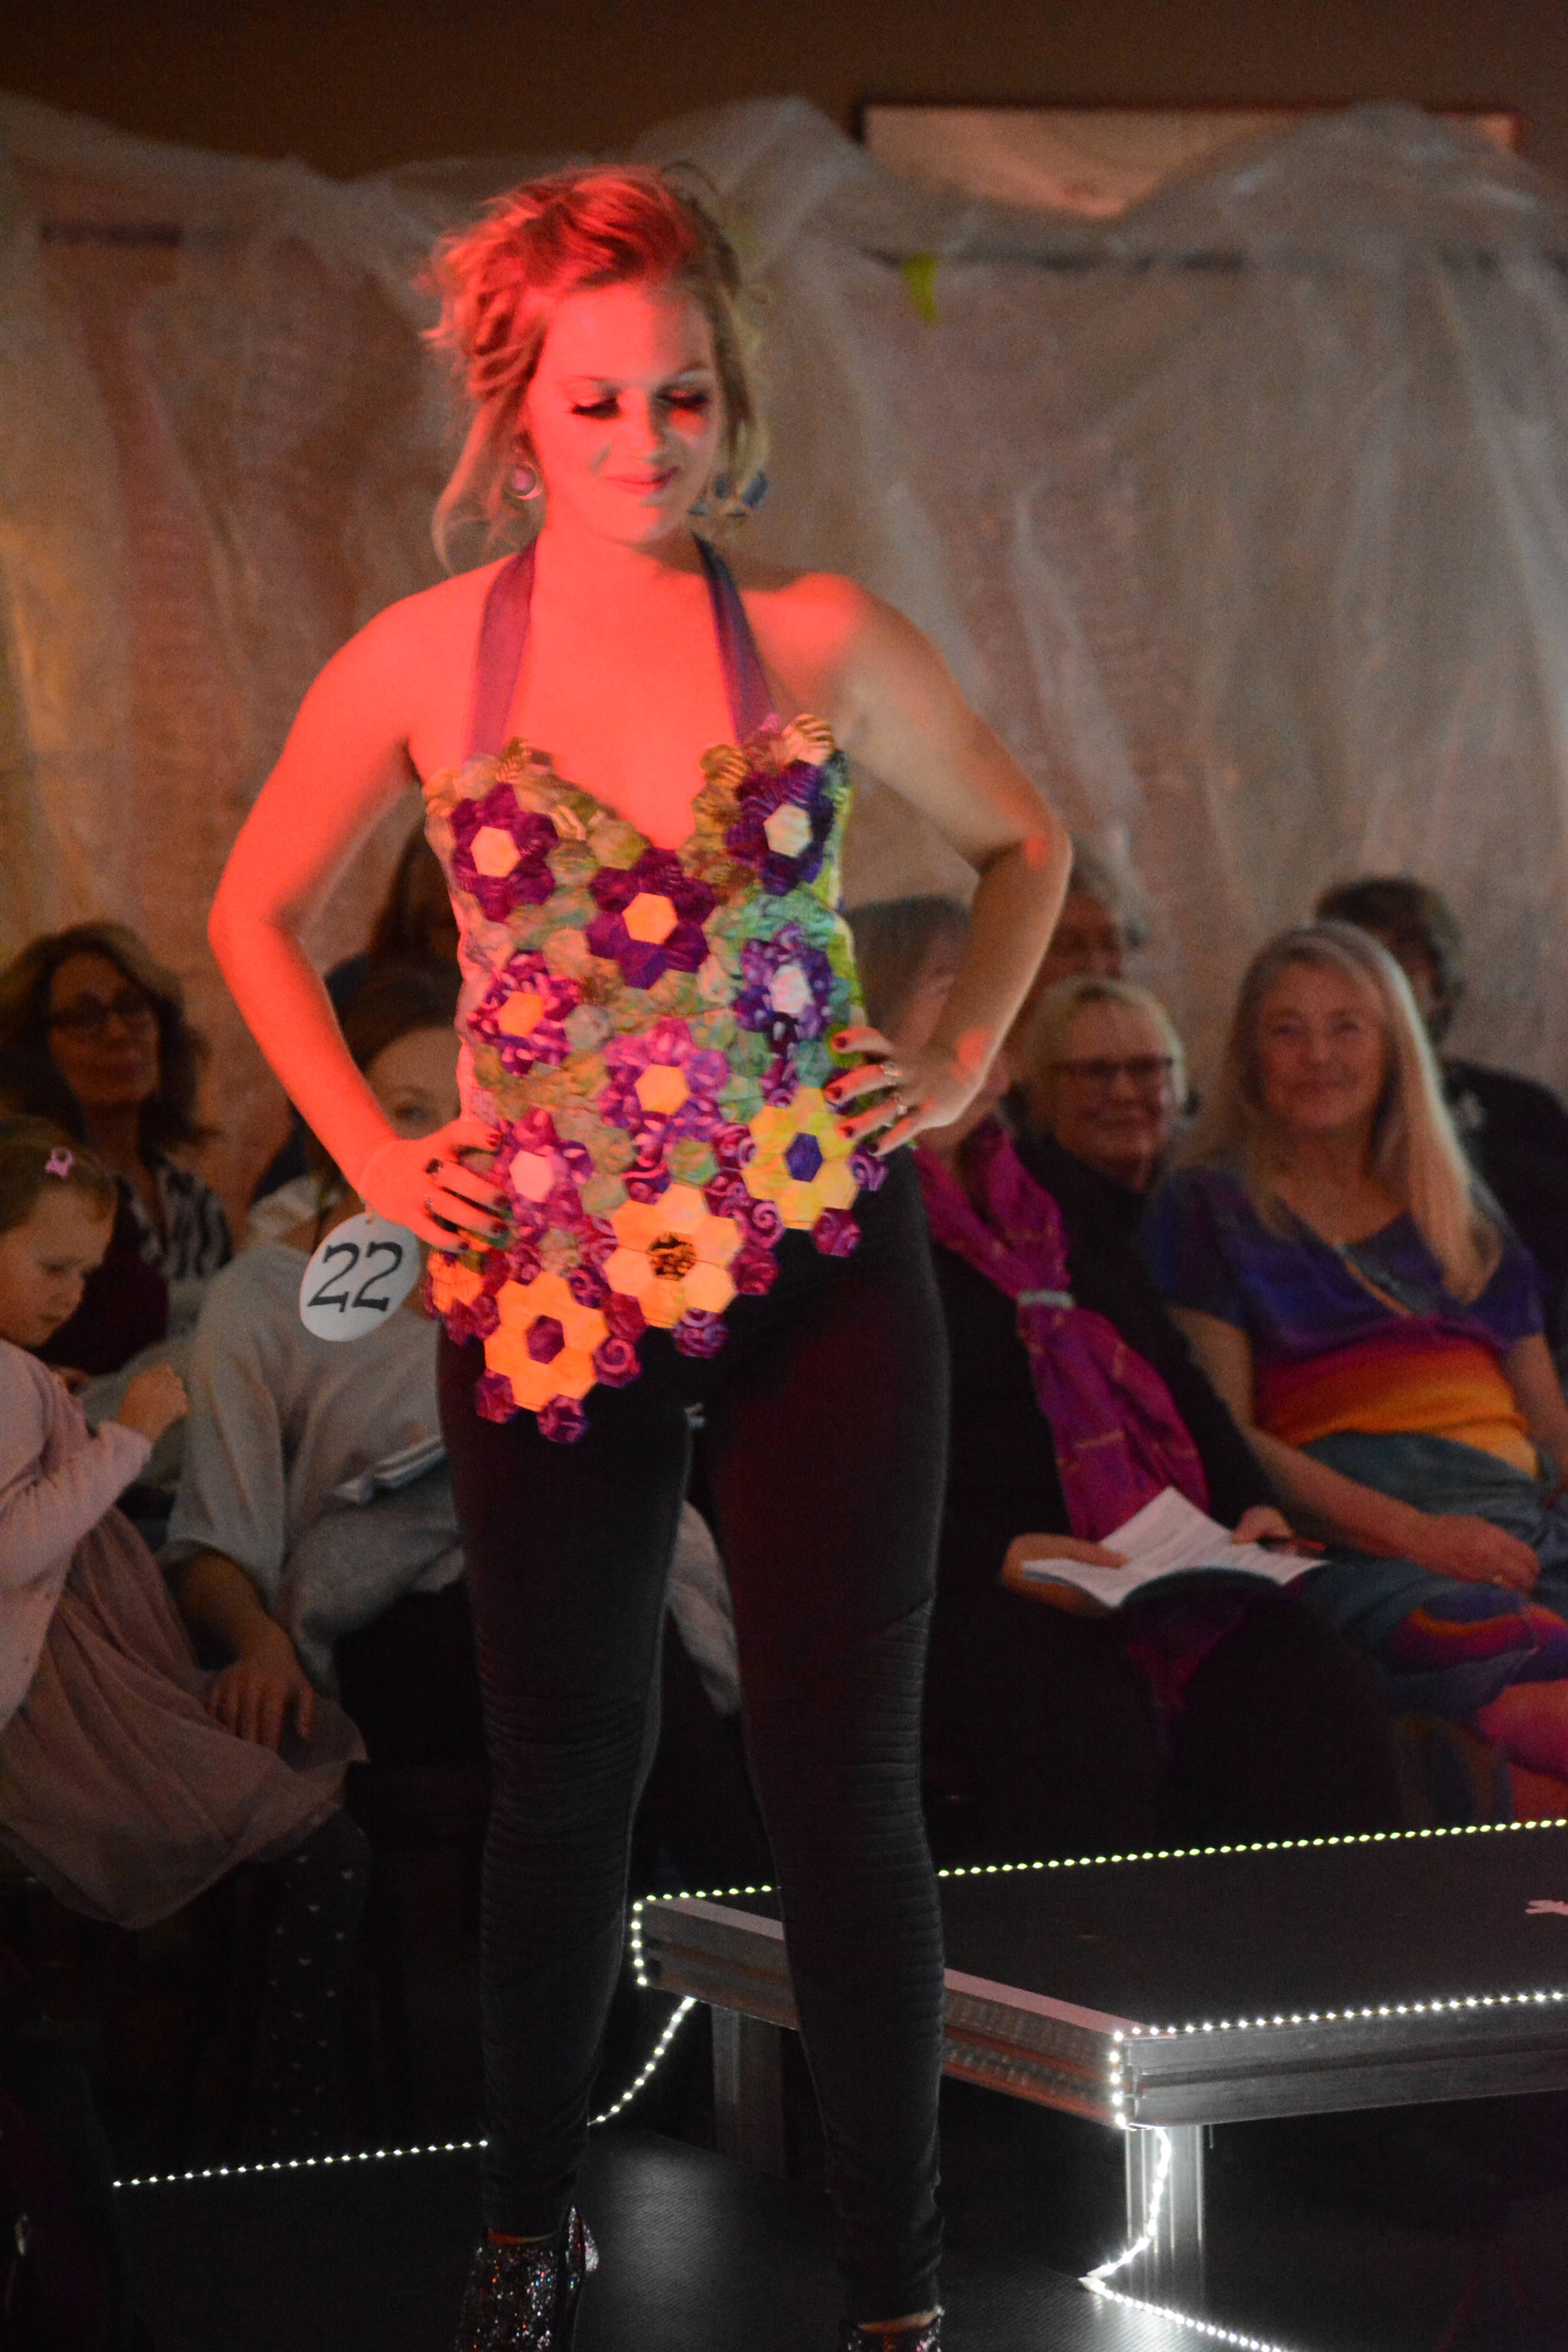 Britt Huffman models “Travelling Hexis Through States” by Linda Skelton at the 2018 Wearable Arts on Nov. 17, 2018, in Homer, Alaska. (Photo by Michael Armstrong/Homer News)